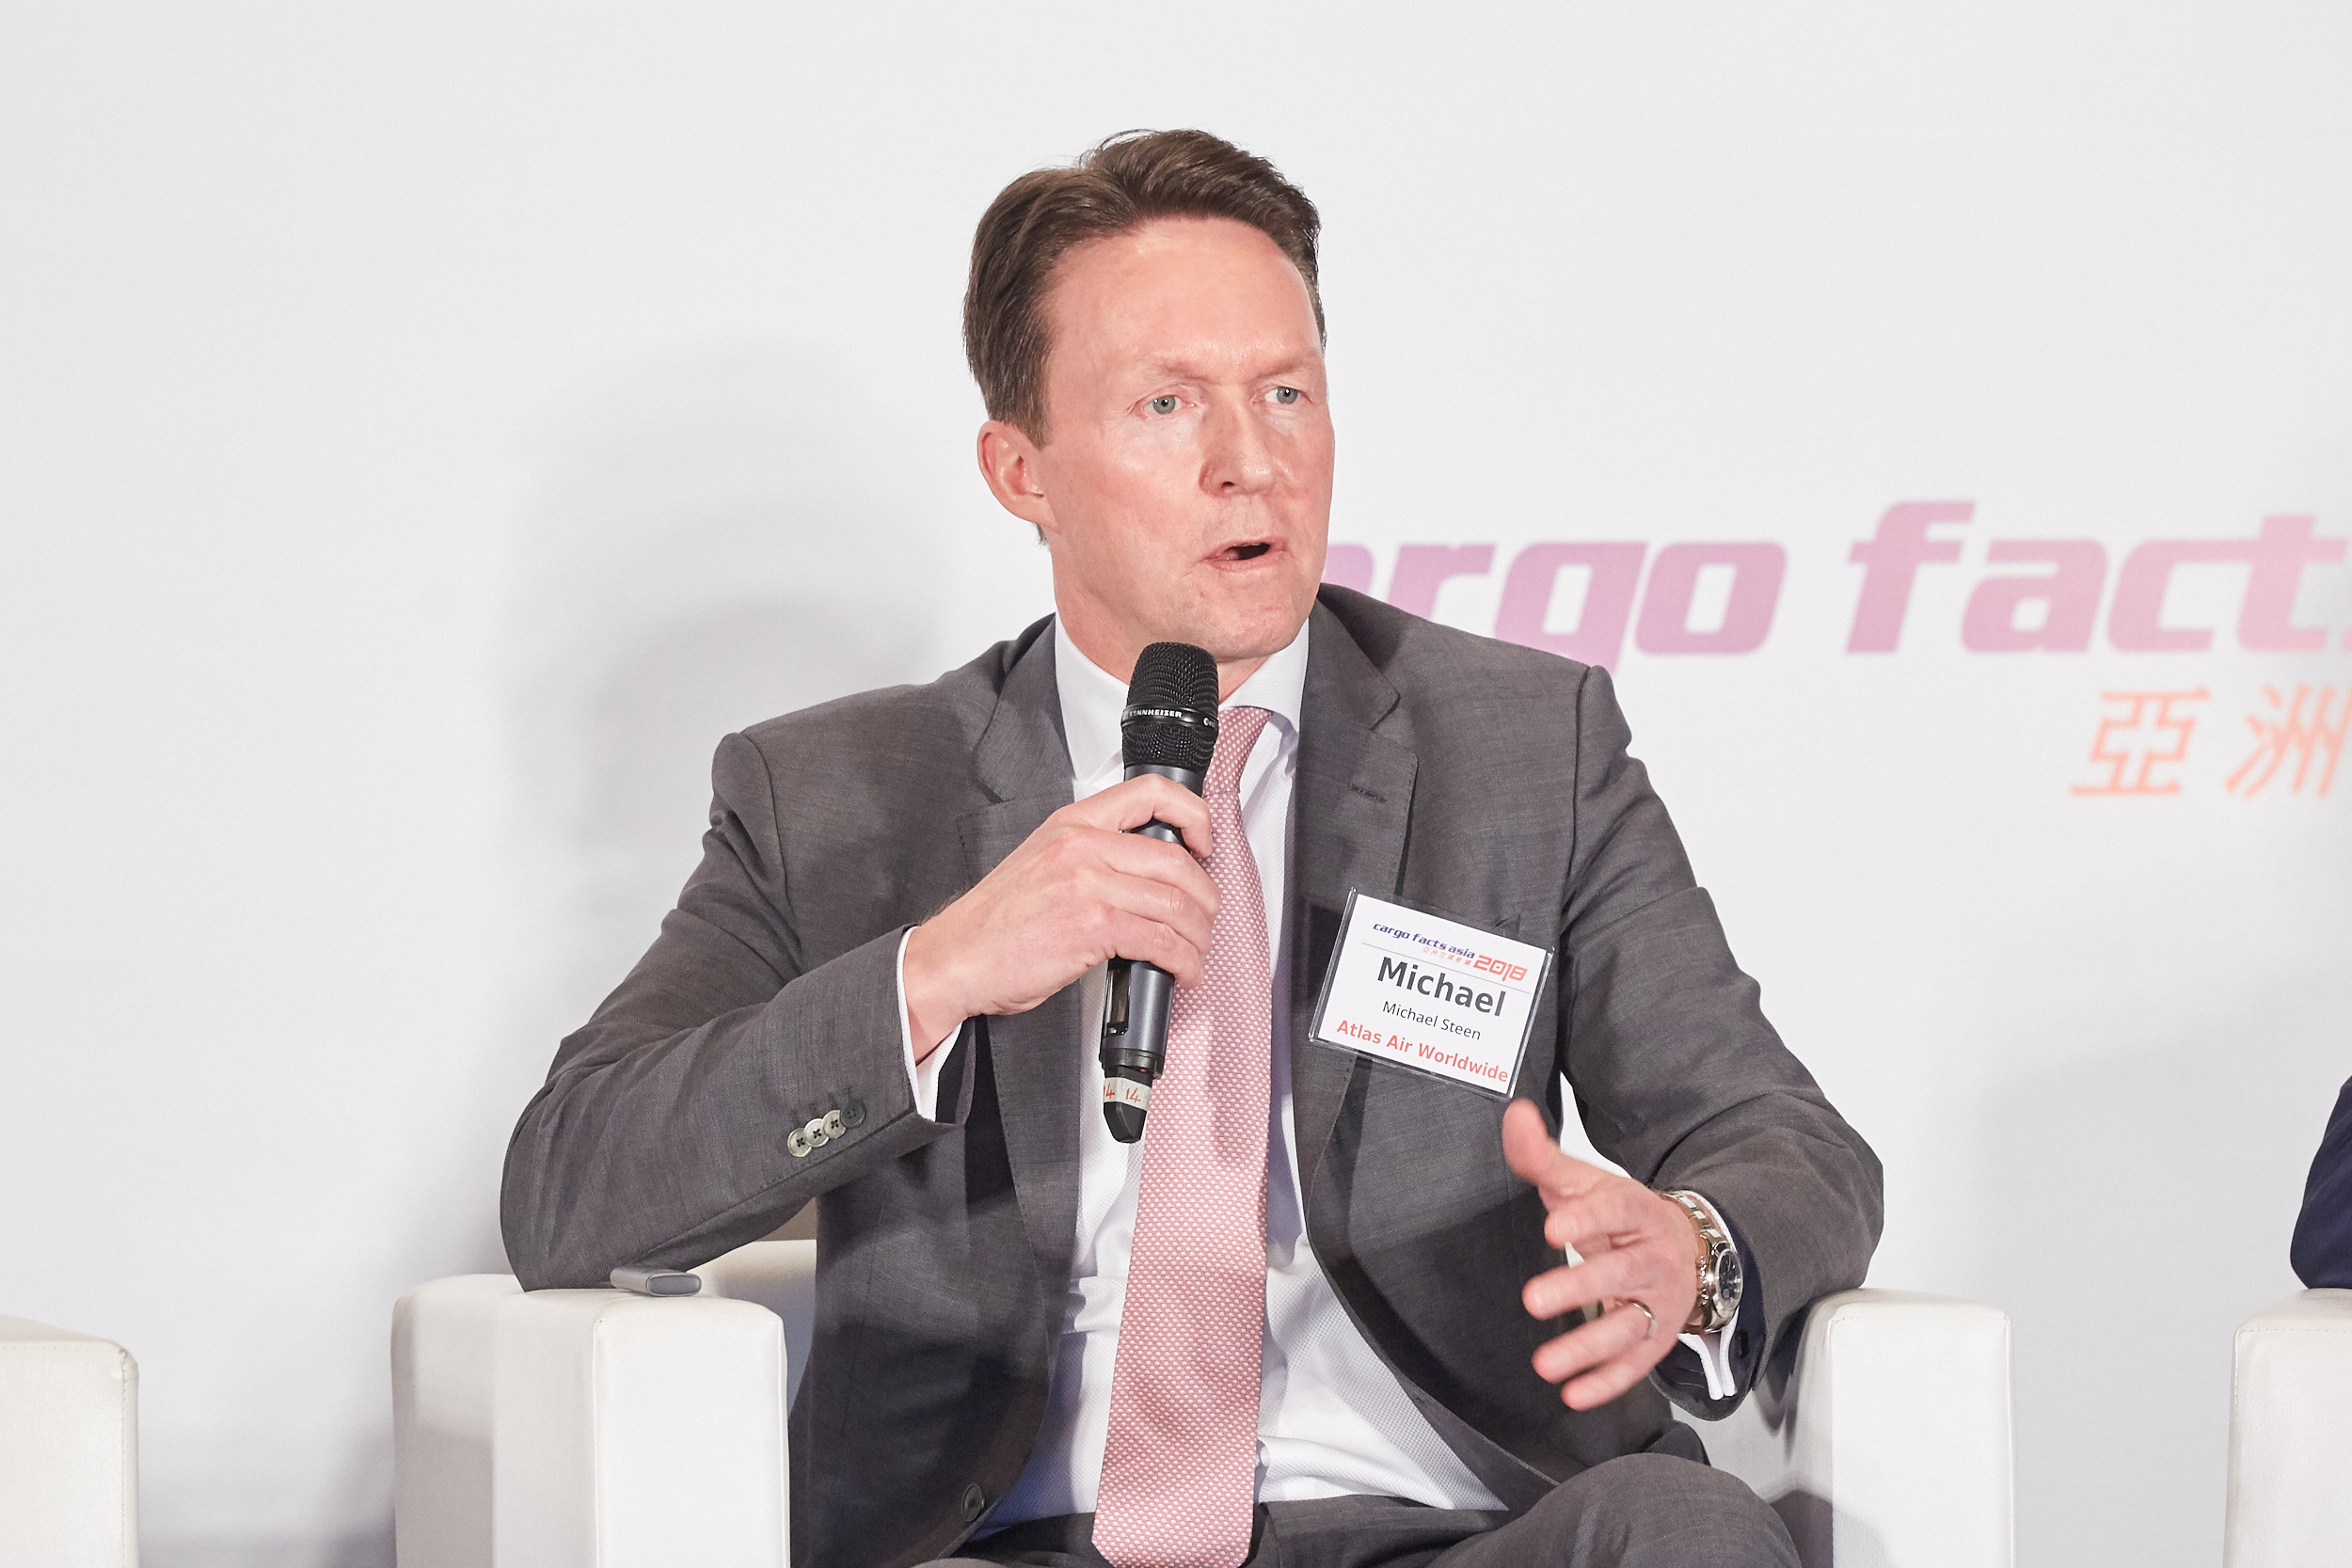 Michael Steen, CCO, Atlas Air Worldwide, at Cargo Facts Asia 2018.